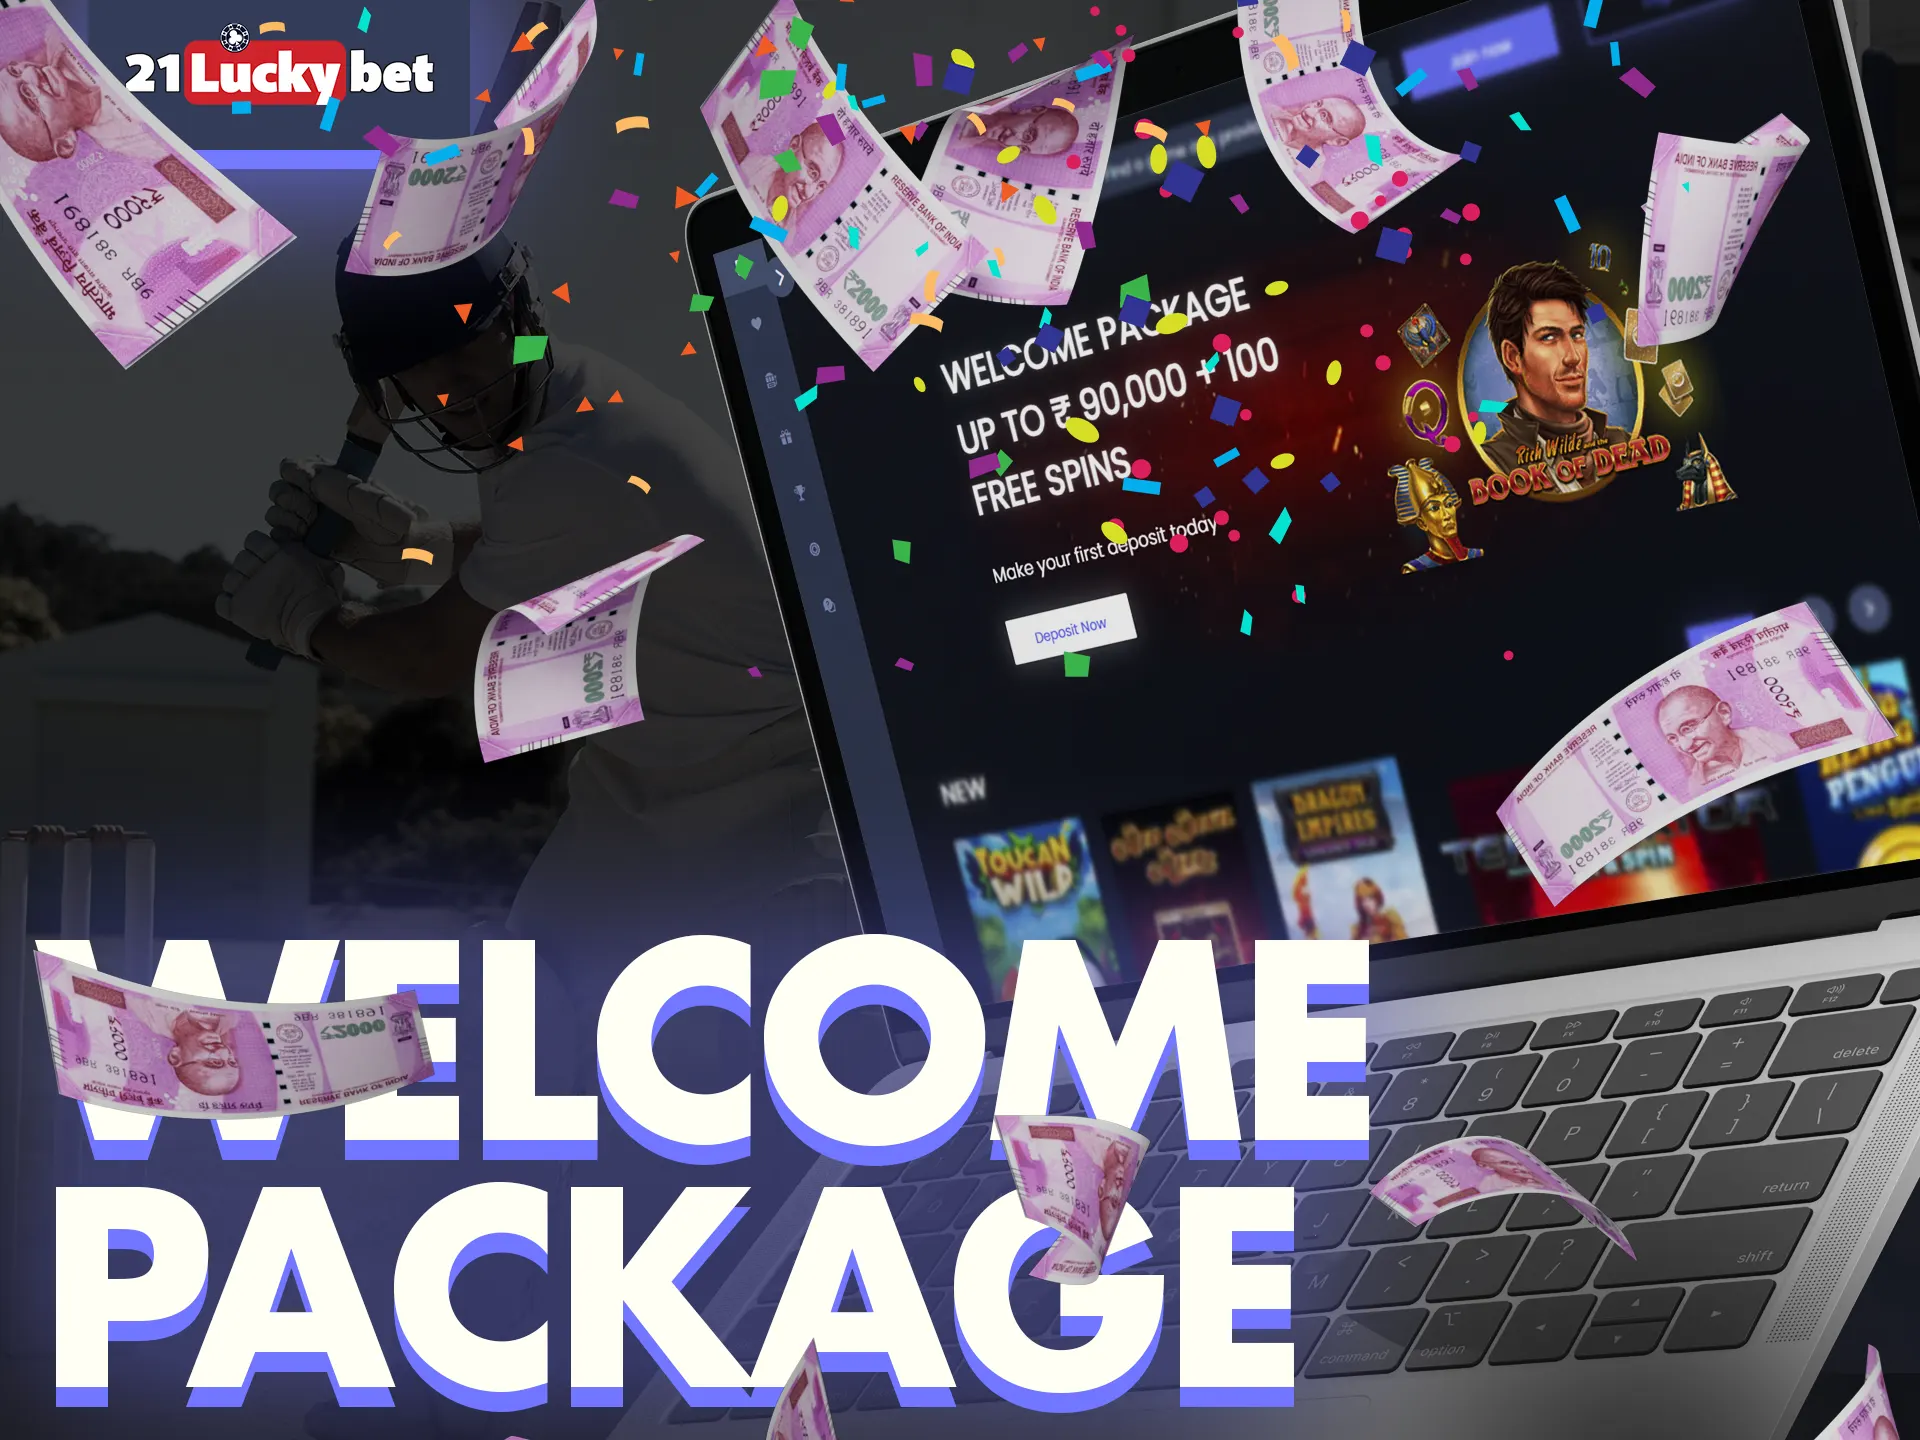 21luckybet gives welcome bonuses.